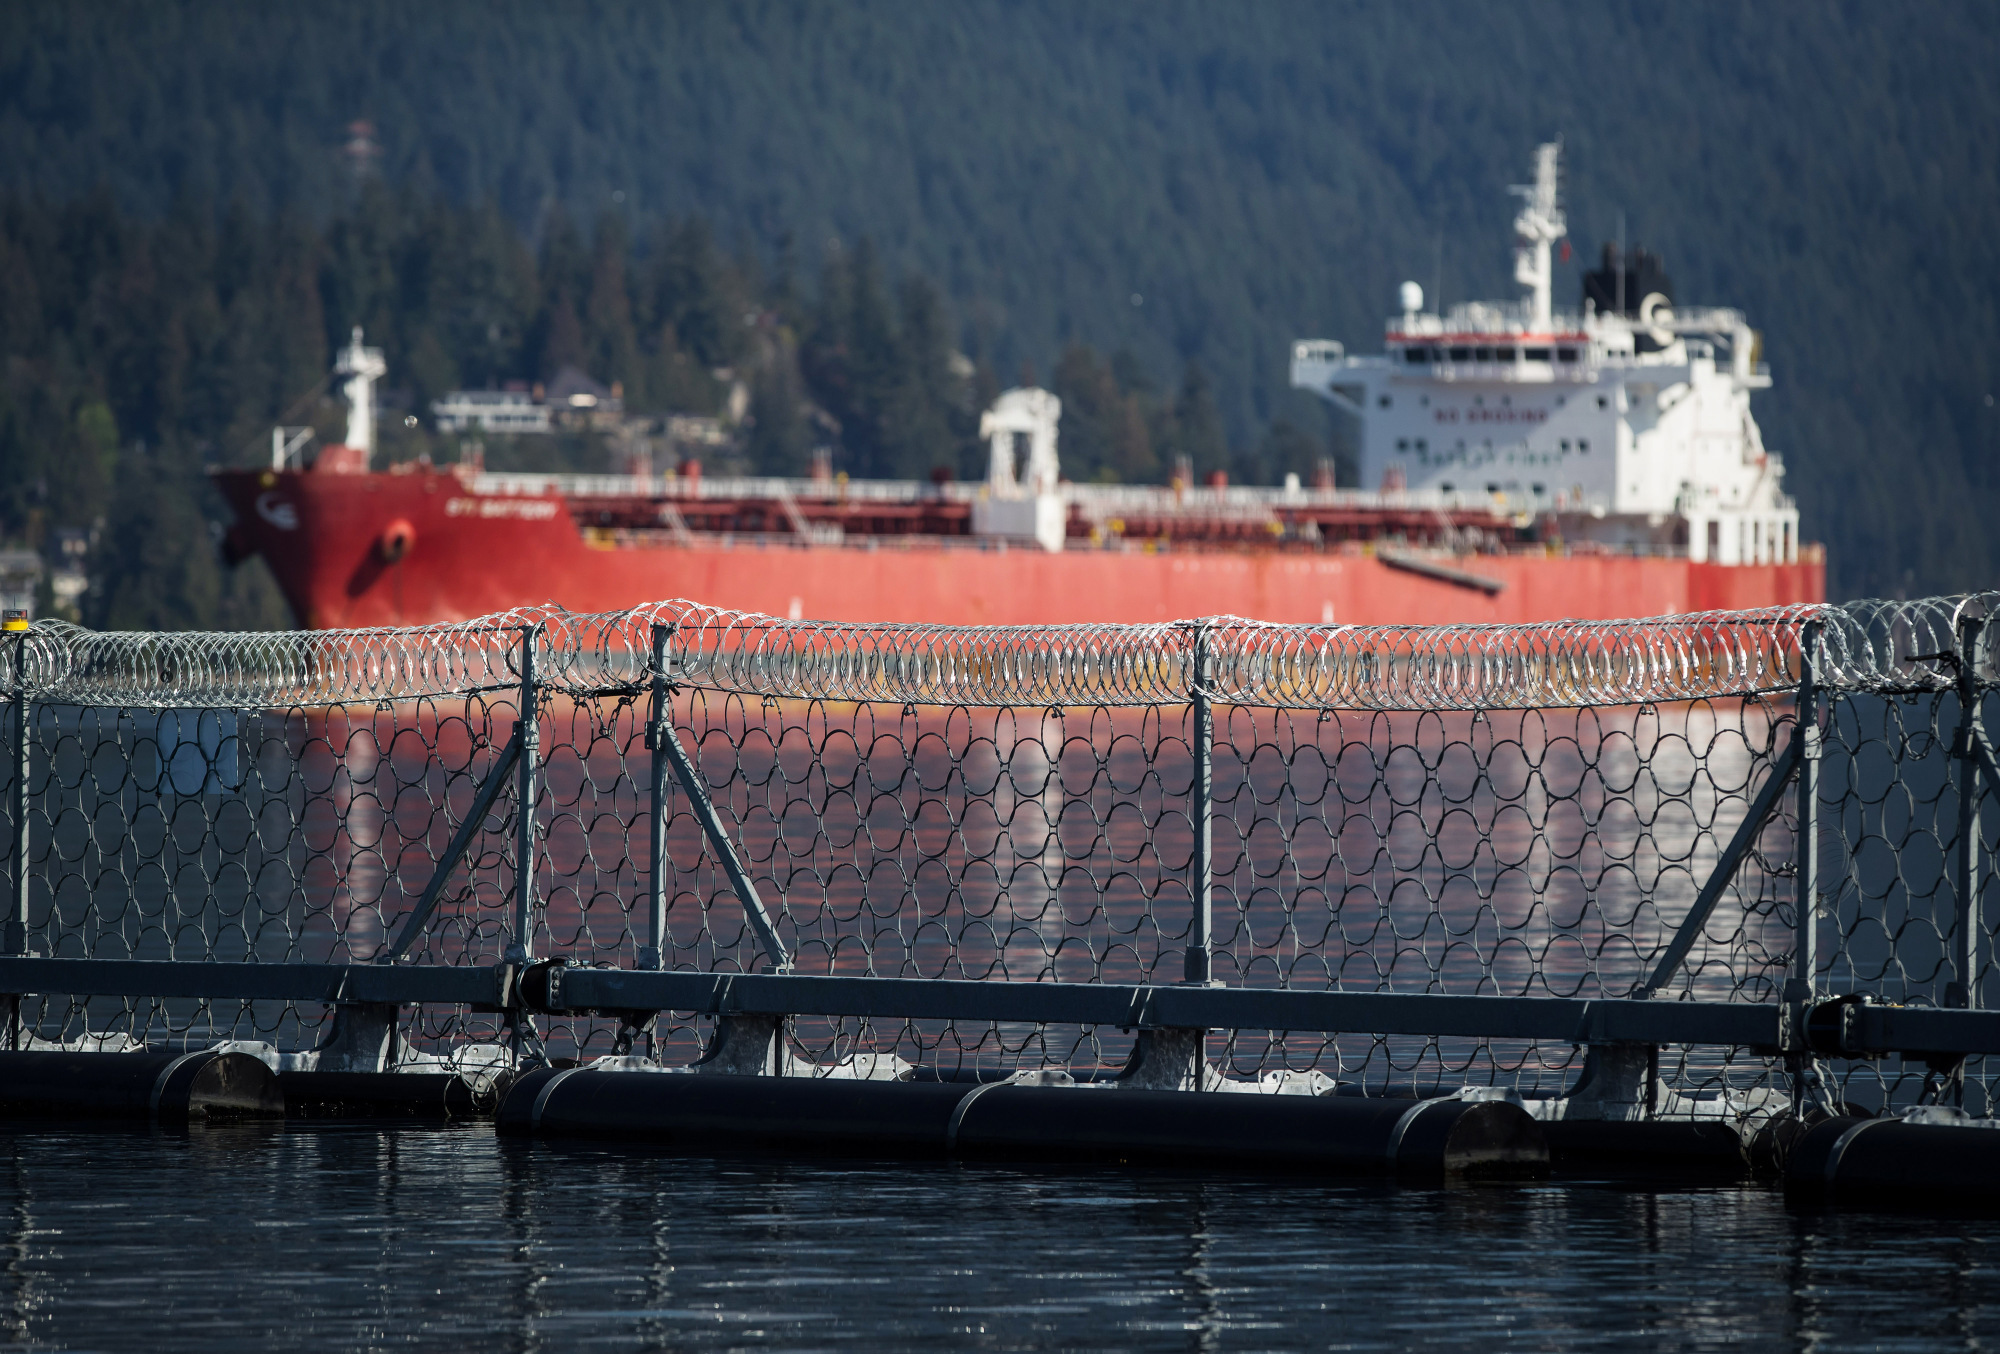 A razor wire security fence floats in front of the STI Battery oil and chemical tanker during an emergency response exercise in Burrard Inlet at the Kinder Morgan Inc. Westridge Marine Terminal in Burnaby, British Columbia, Canada, on Wednesday, Sept. 19, 2018. A Canadian court's decision to nullify approval of the Trans Mountain Expansion Project will increase crude-by-rail transport in the near term and will likely have a "negative impact on Canadian output growth in the longer term," the International Energy Agency said earlier this month. Photographer: Darryl Dyck/Bloomberg